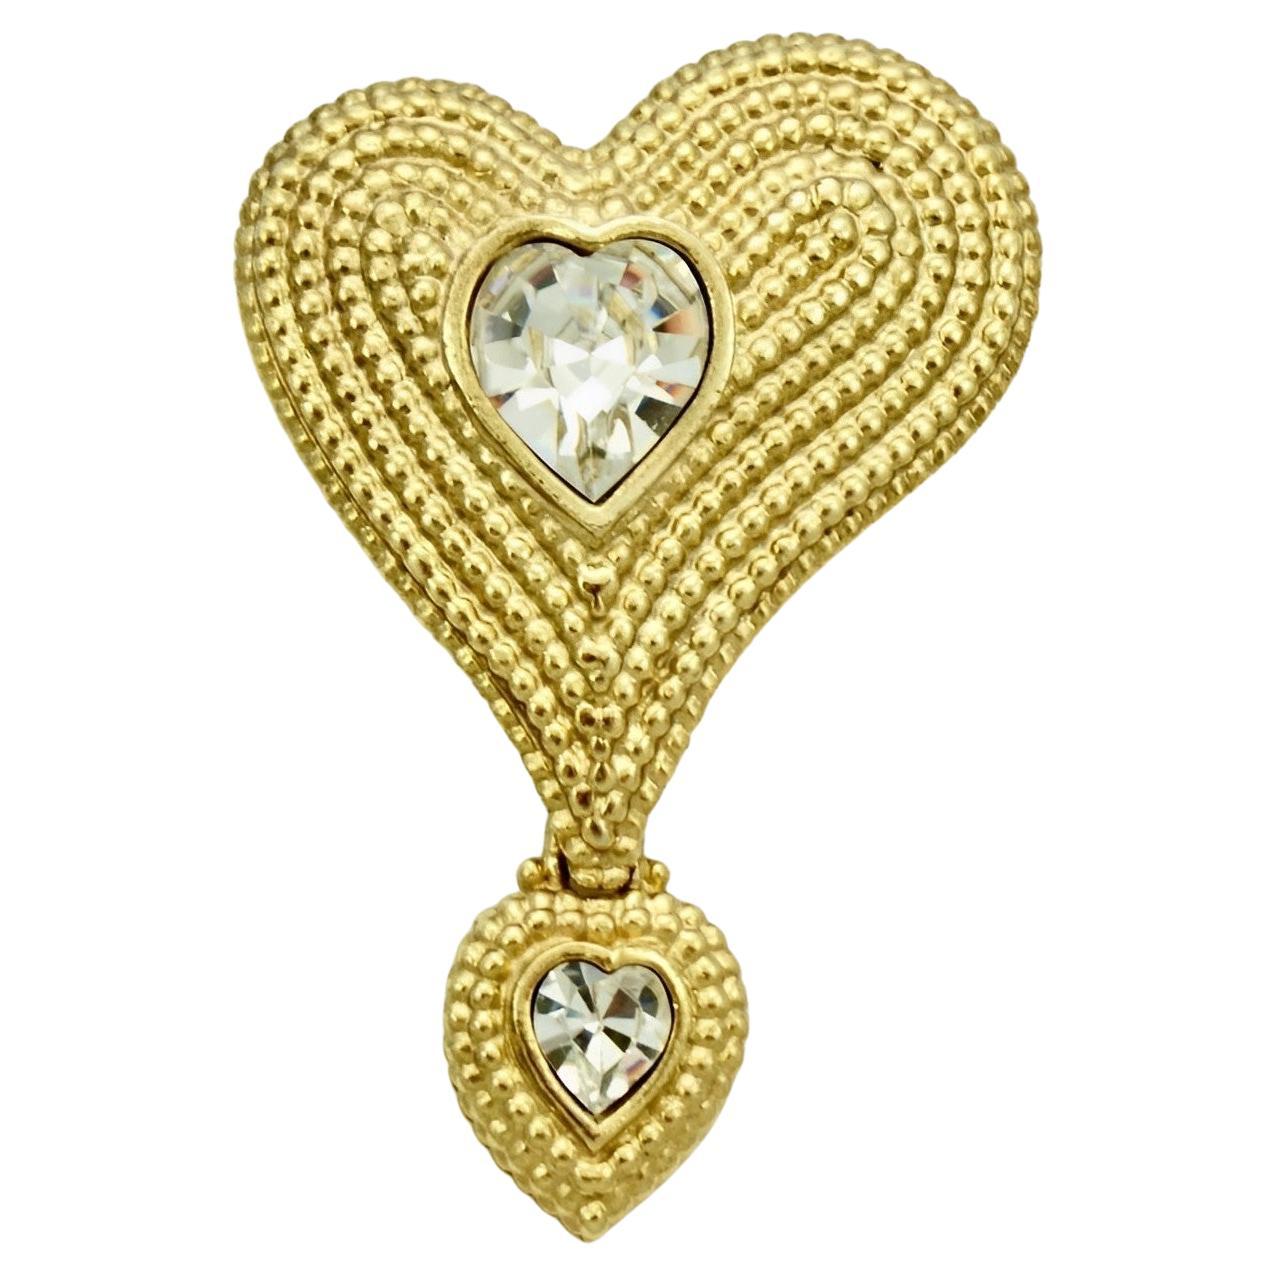 Butler & Wilson Large Double Heart Brooch with Clear Crystals circa 1980s For Sale